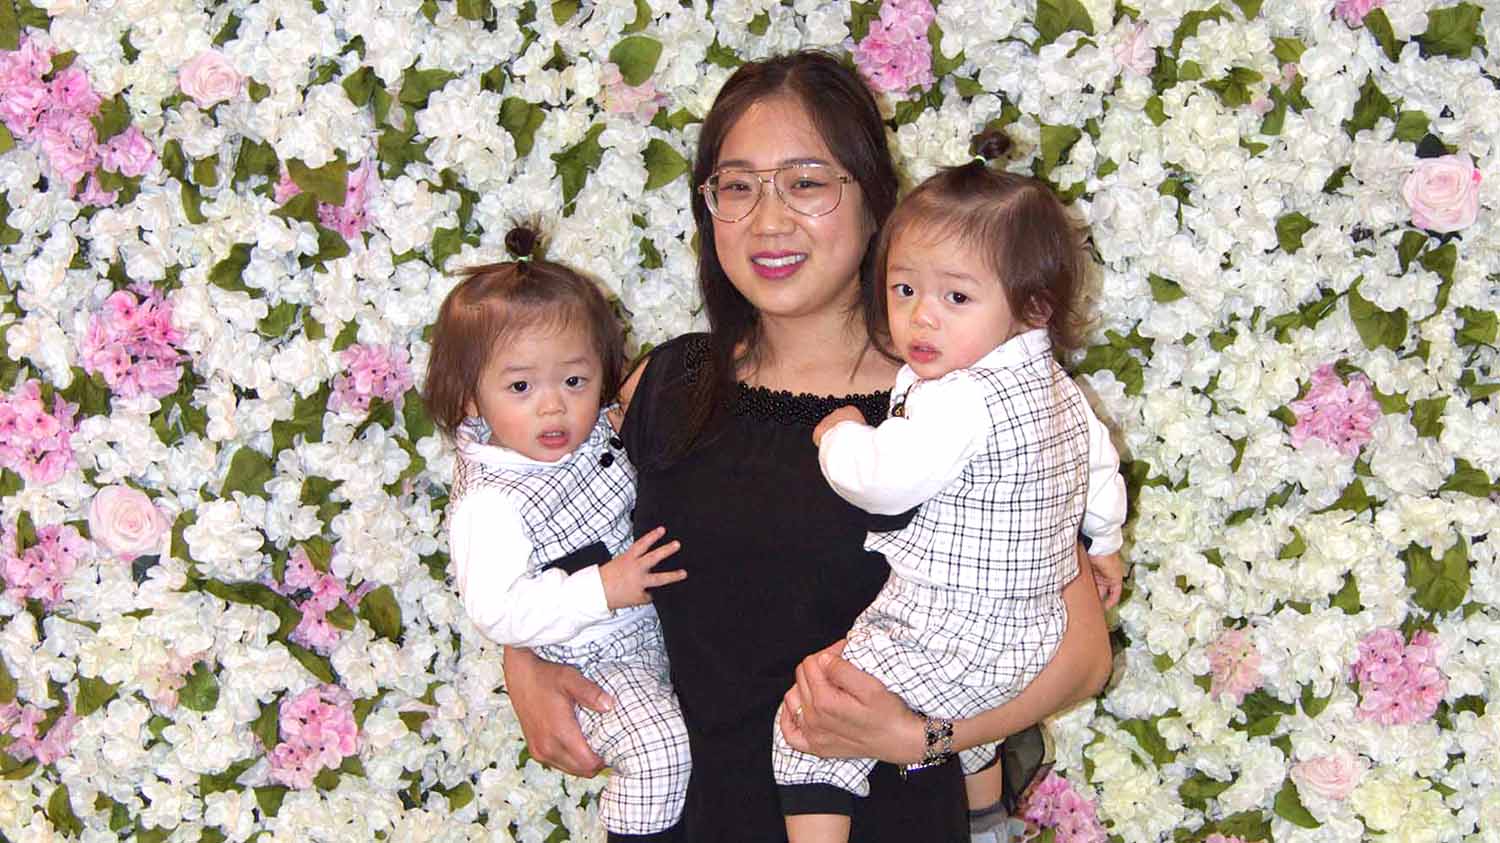 Michelle holding her twin boys at a work event